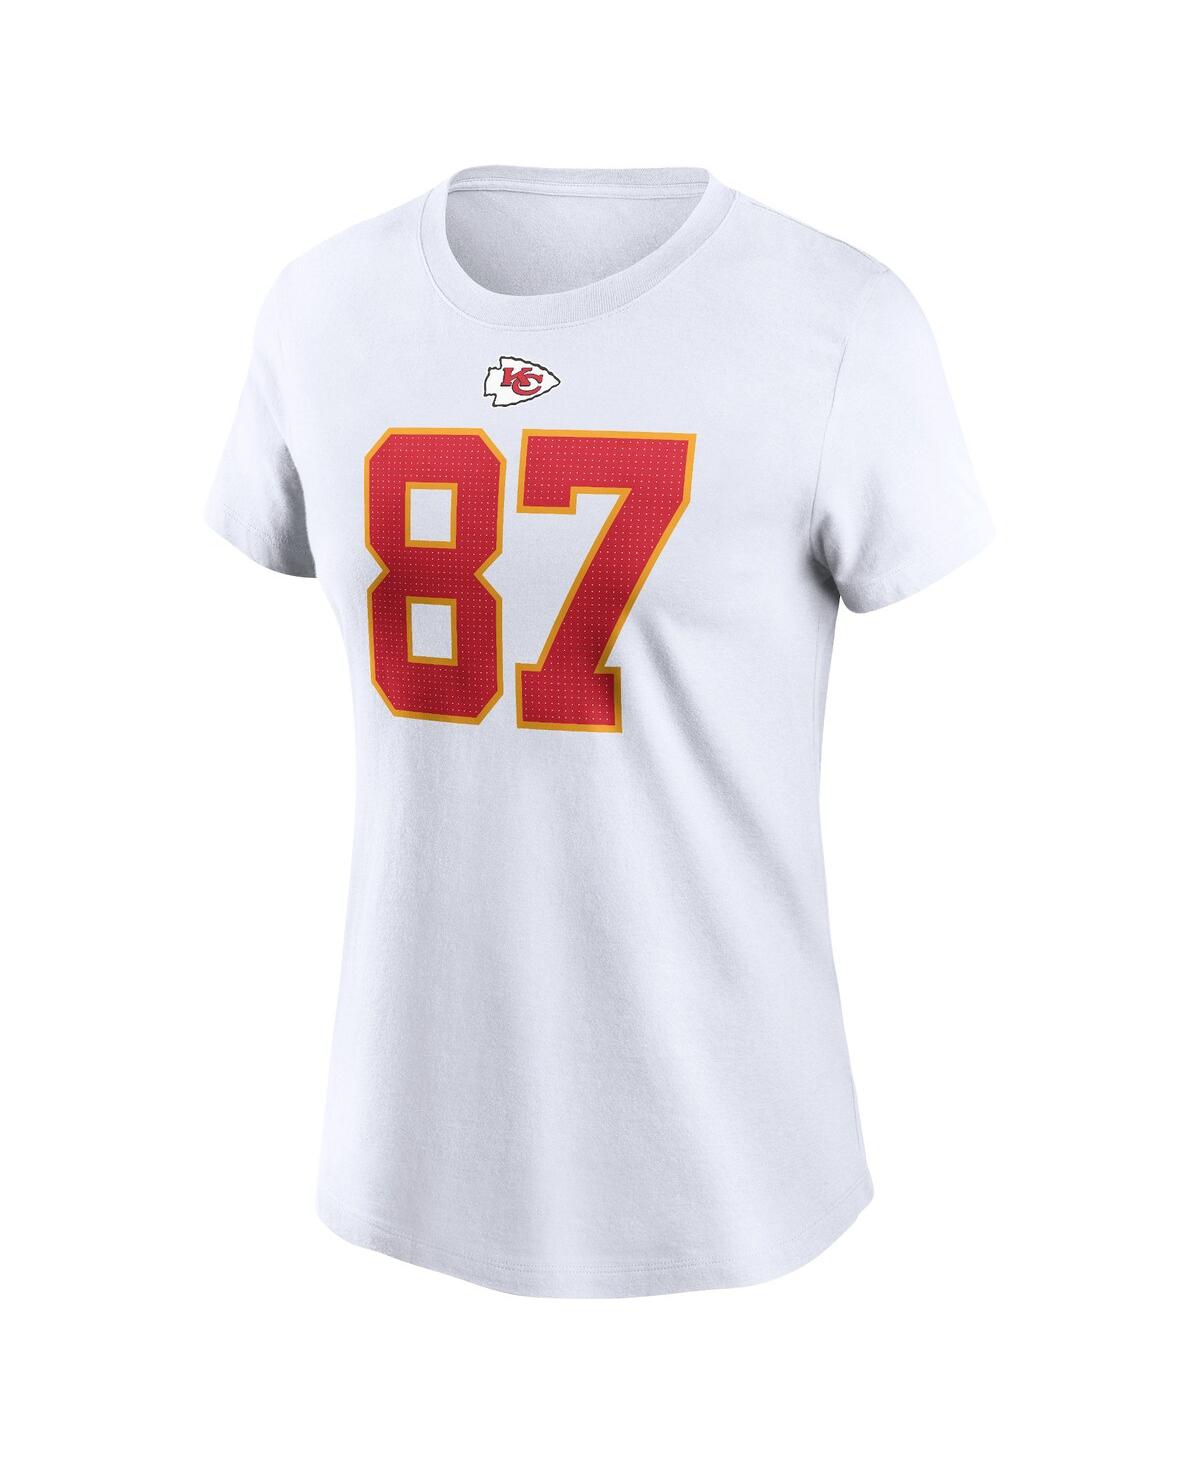 Shop Nike Women's  Travis Kelce White Kansas City Chiefs Player Name And Number T-shirt